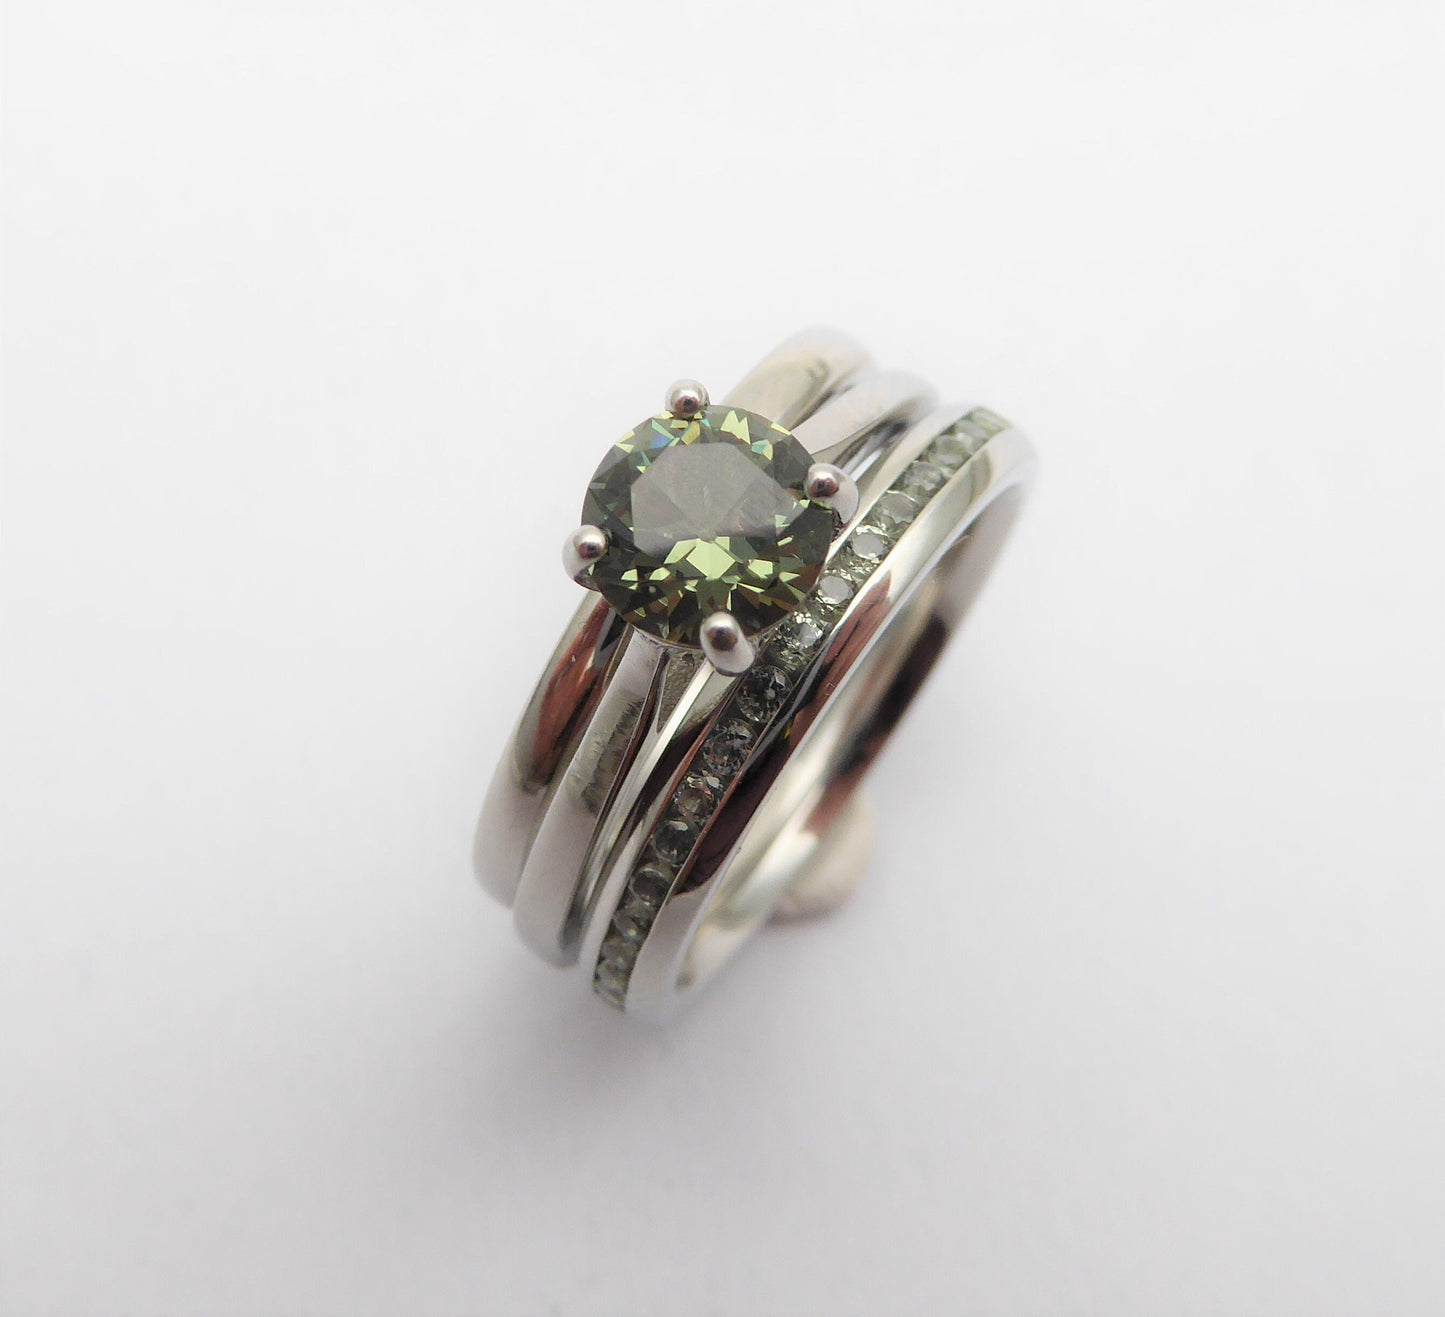 Wedding set! Green Sapphire 1ct cathedral solitaire and matching eternity & Wedding ring in Titanium or White Gold